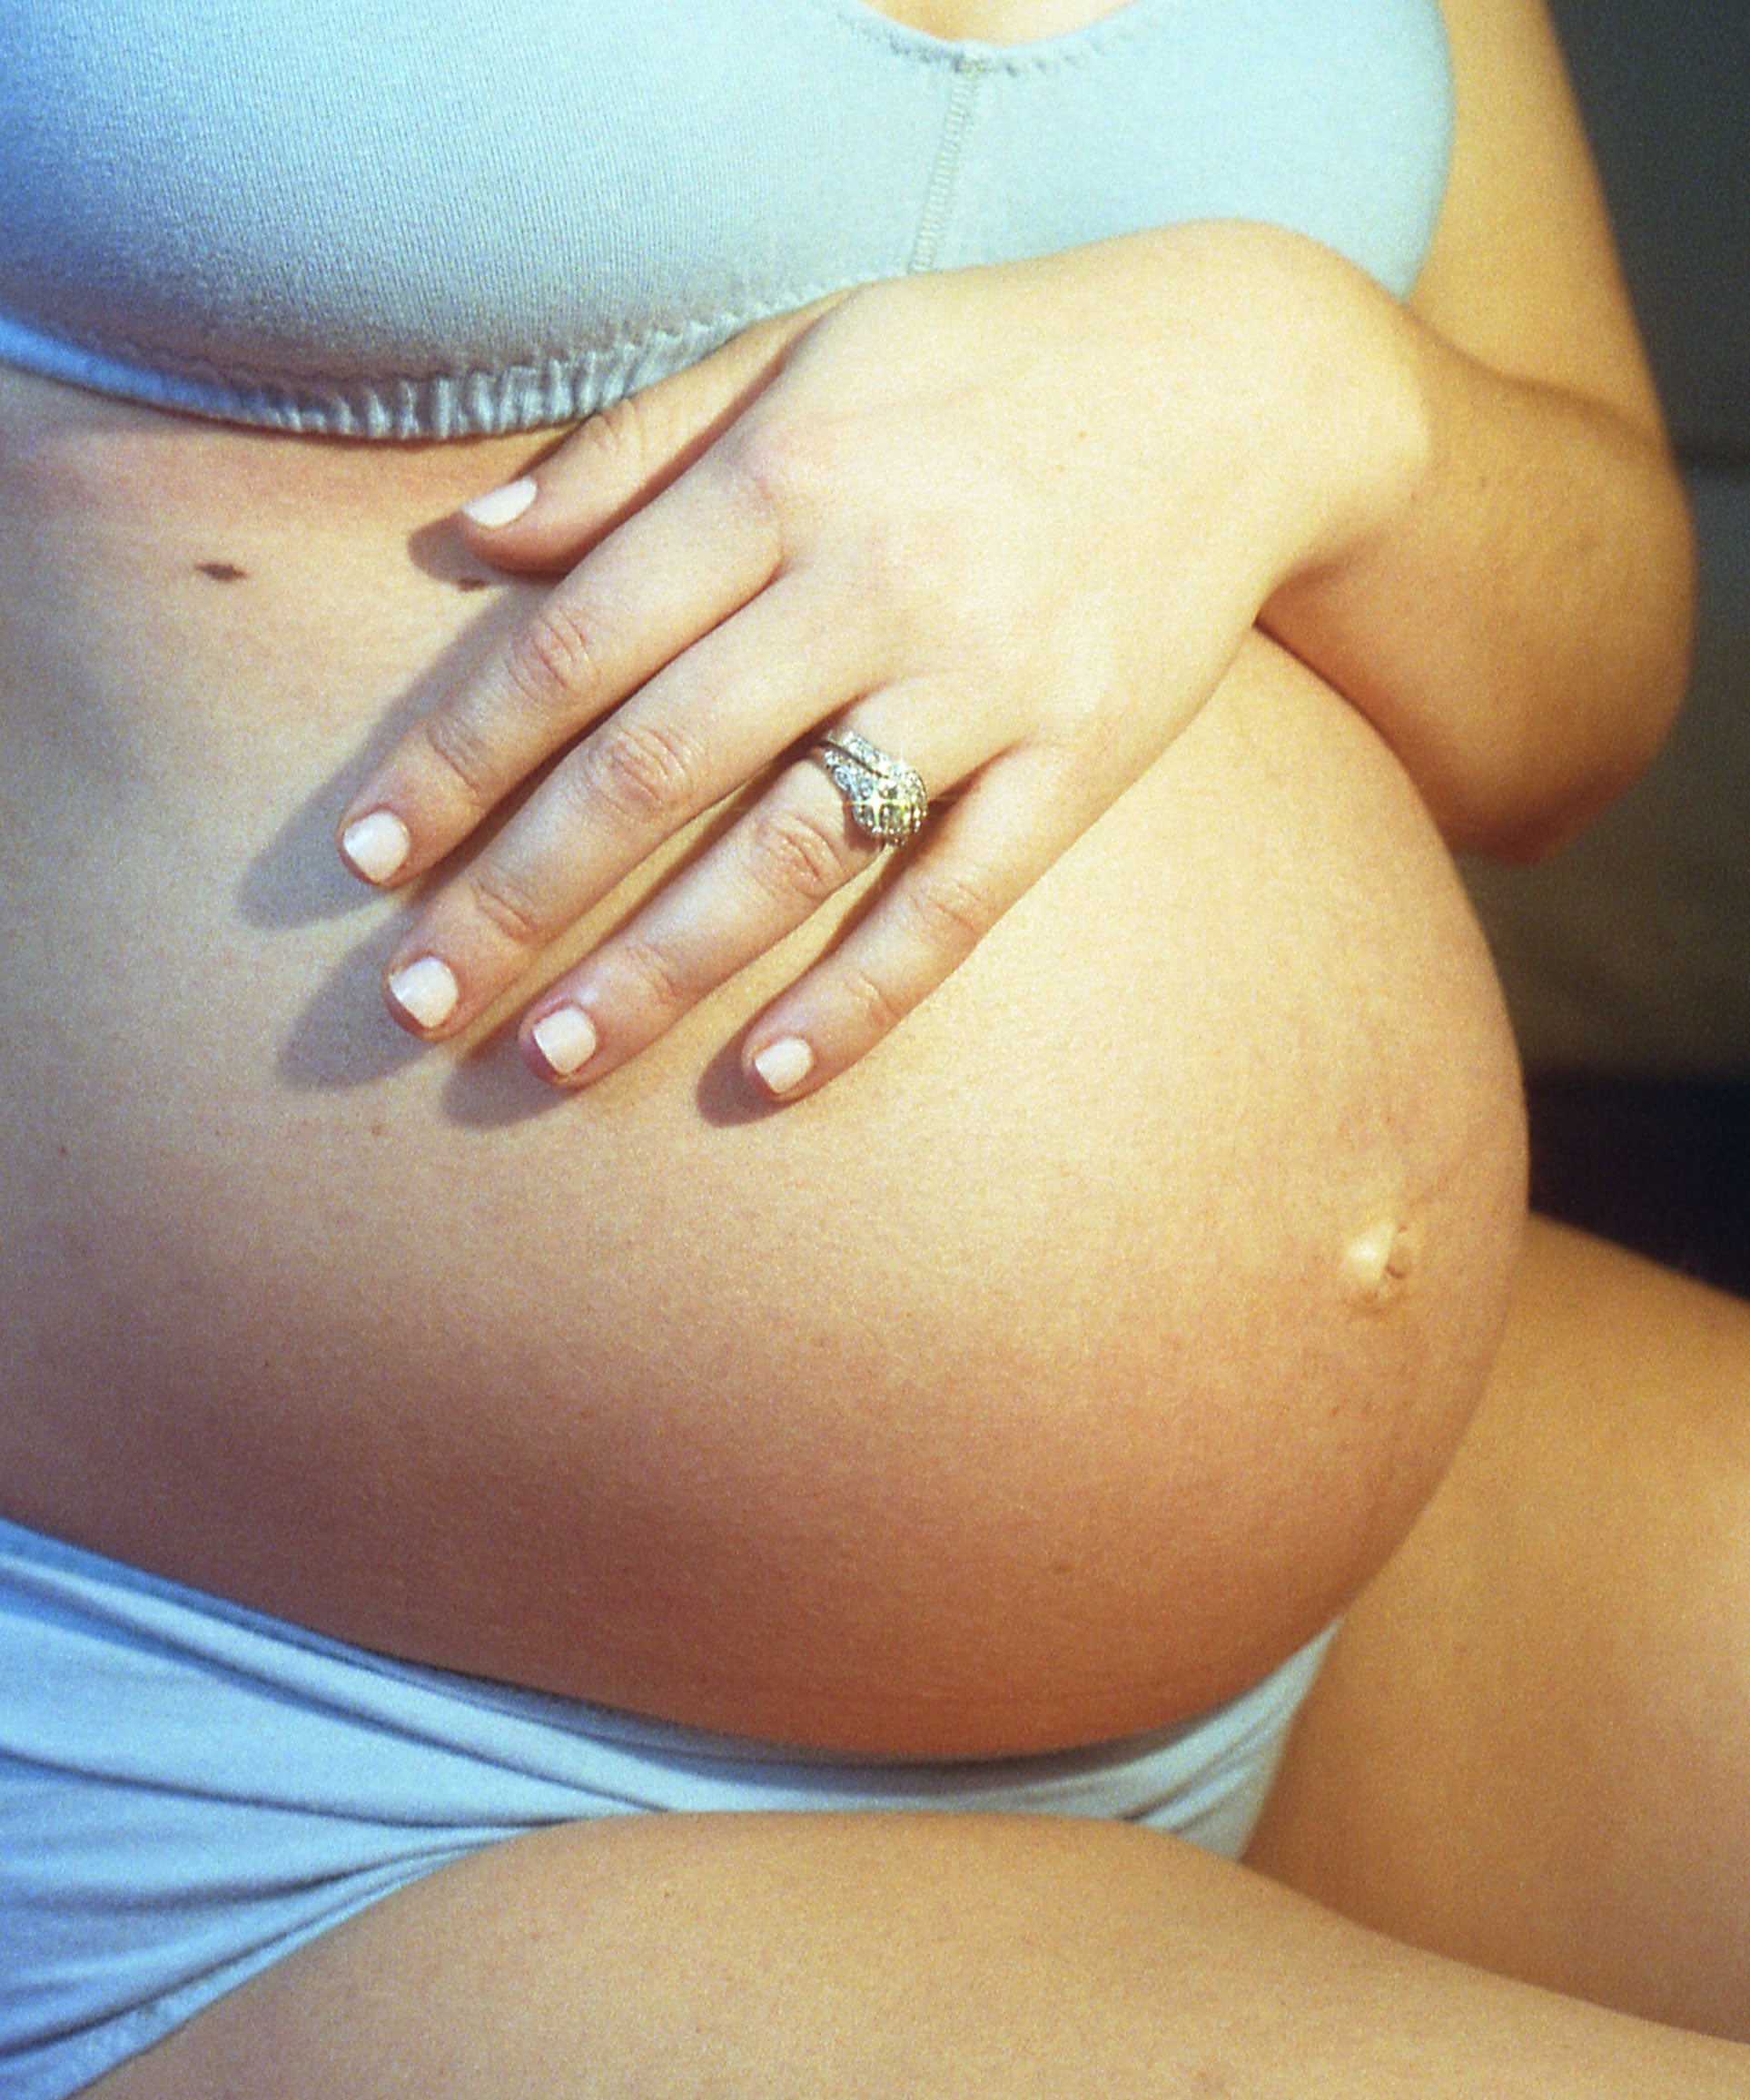 Preggo Smoking Weed - Smoking Weed While Pregnant: Effects & Laws Explained